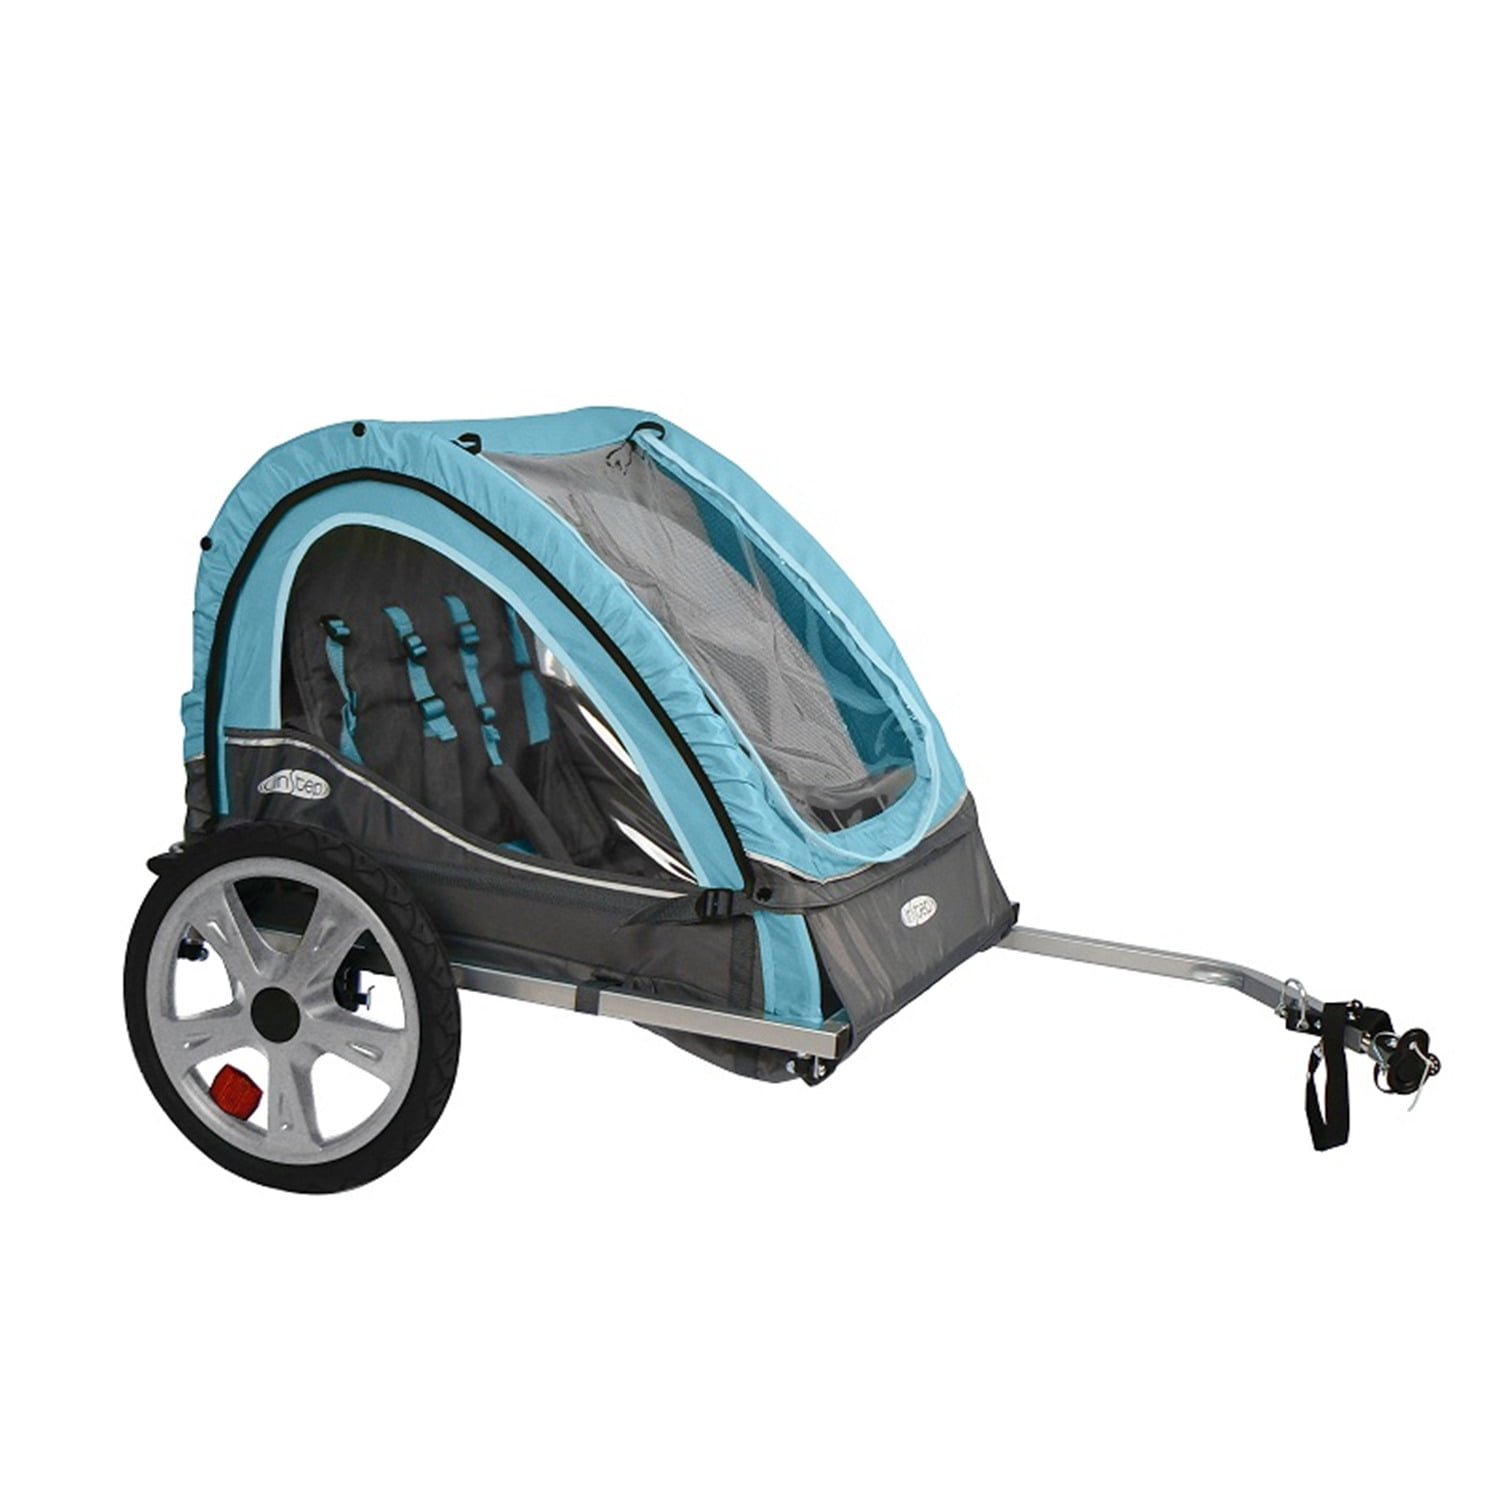 Renewed Featuring 2-in-1 Canopy and 16-Inch Wheels InStep Single Seat and Double Seat Foldable Tow Behind Bike Trailers for Kids and Children Multiple Colors Available 